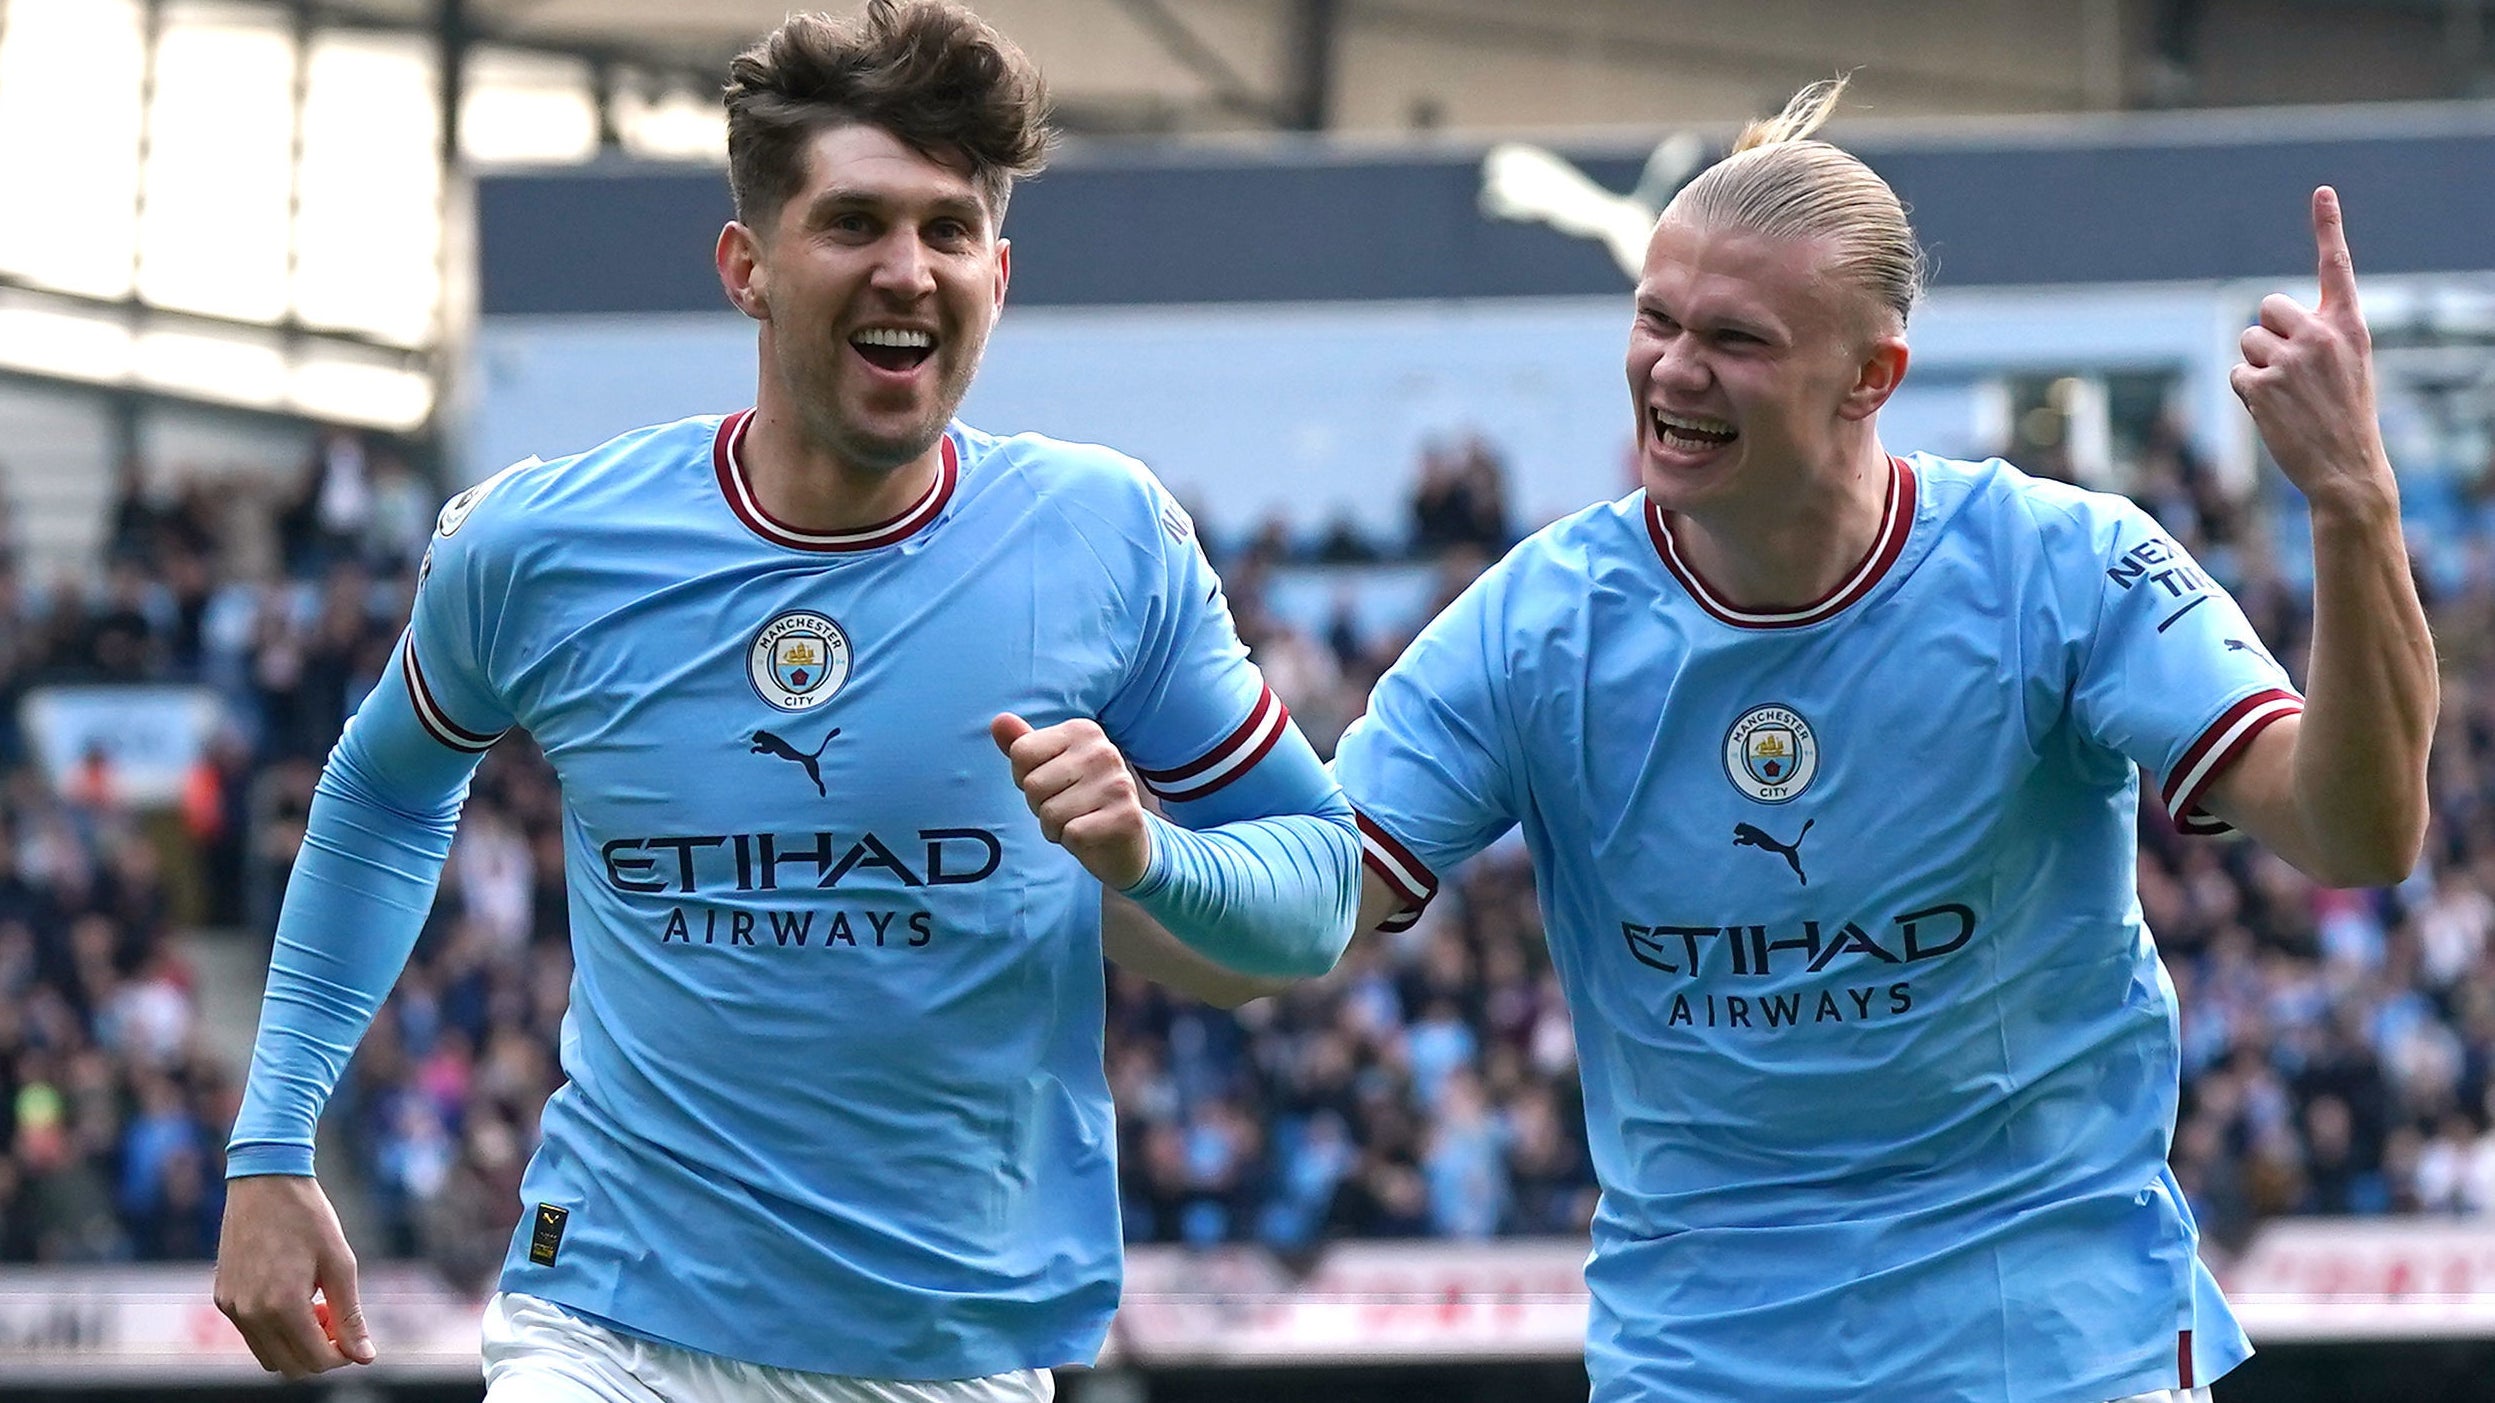 John Stones scored a scarceley believable goal for Man City against Leicester